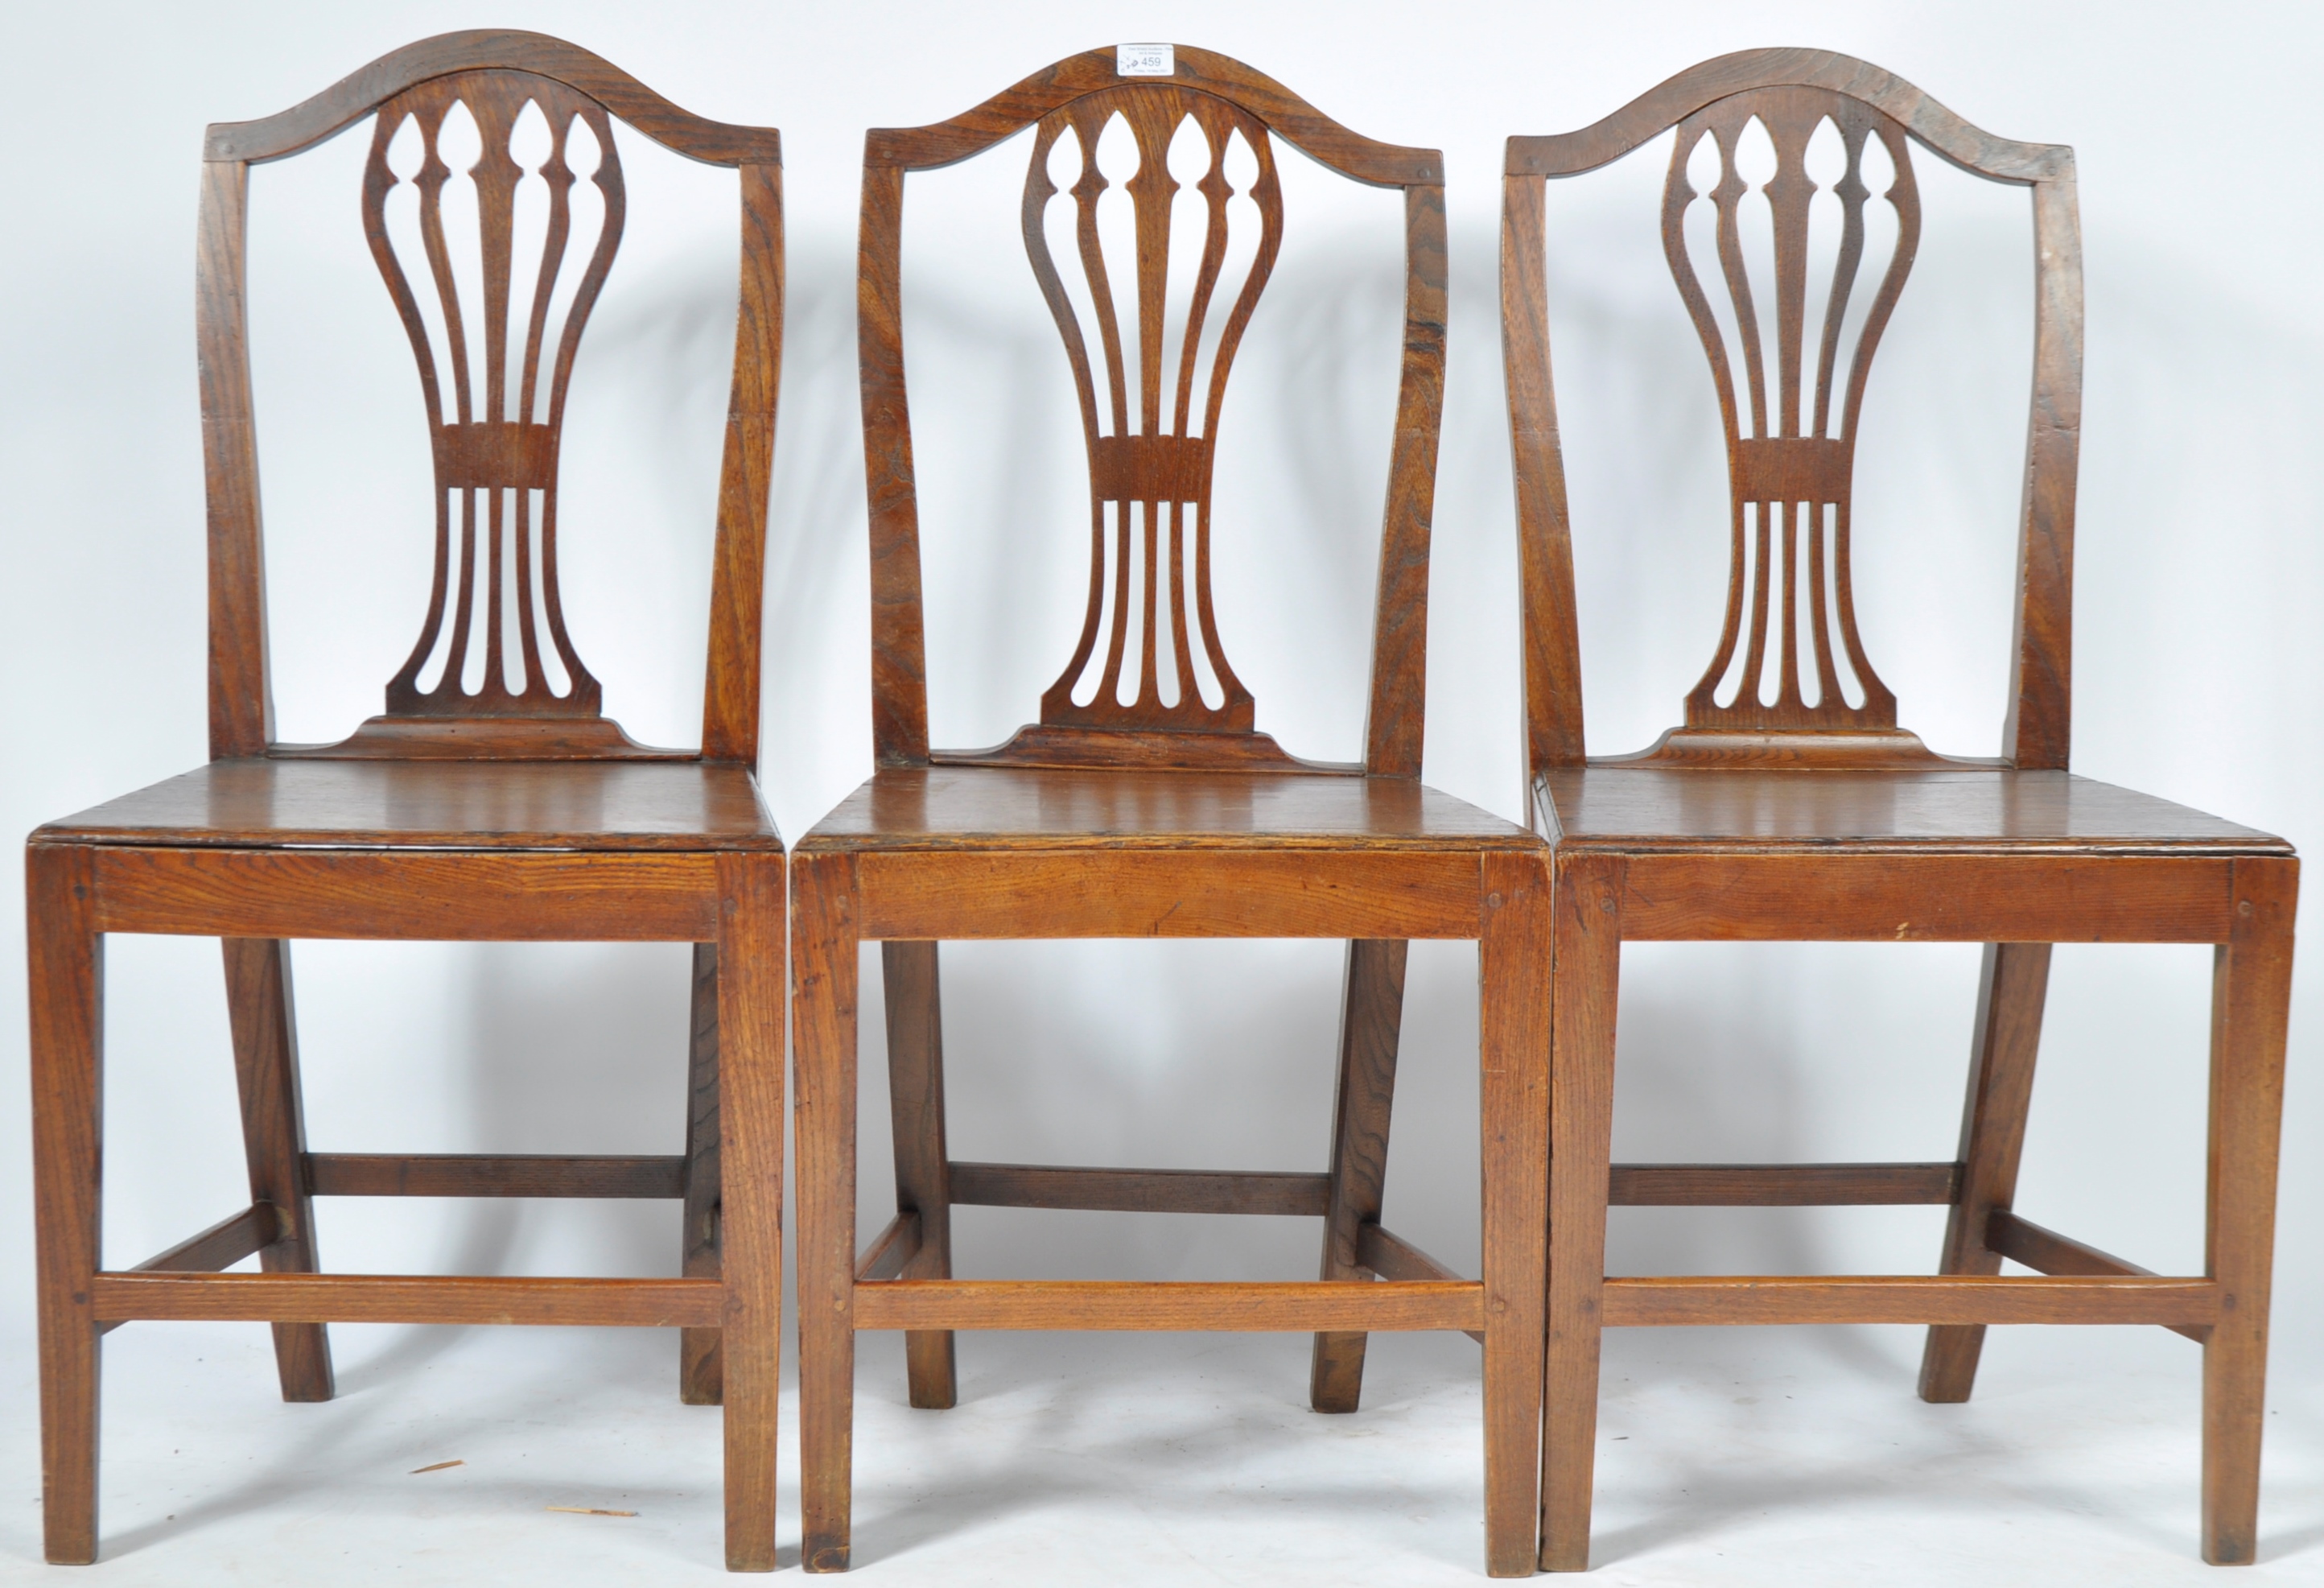 SET OF SIX 18TH CENTURY CHIPPENDALE STYLE OAK & ELM DINING CHAIRS - Image 7 of 11